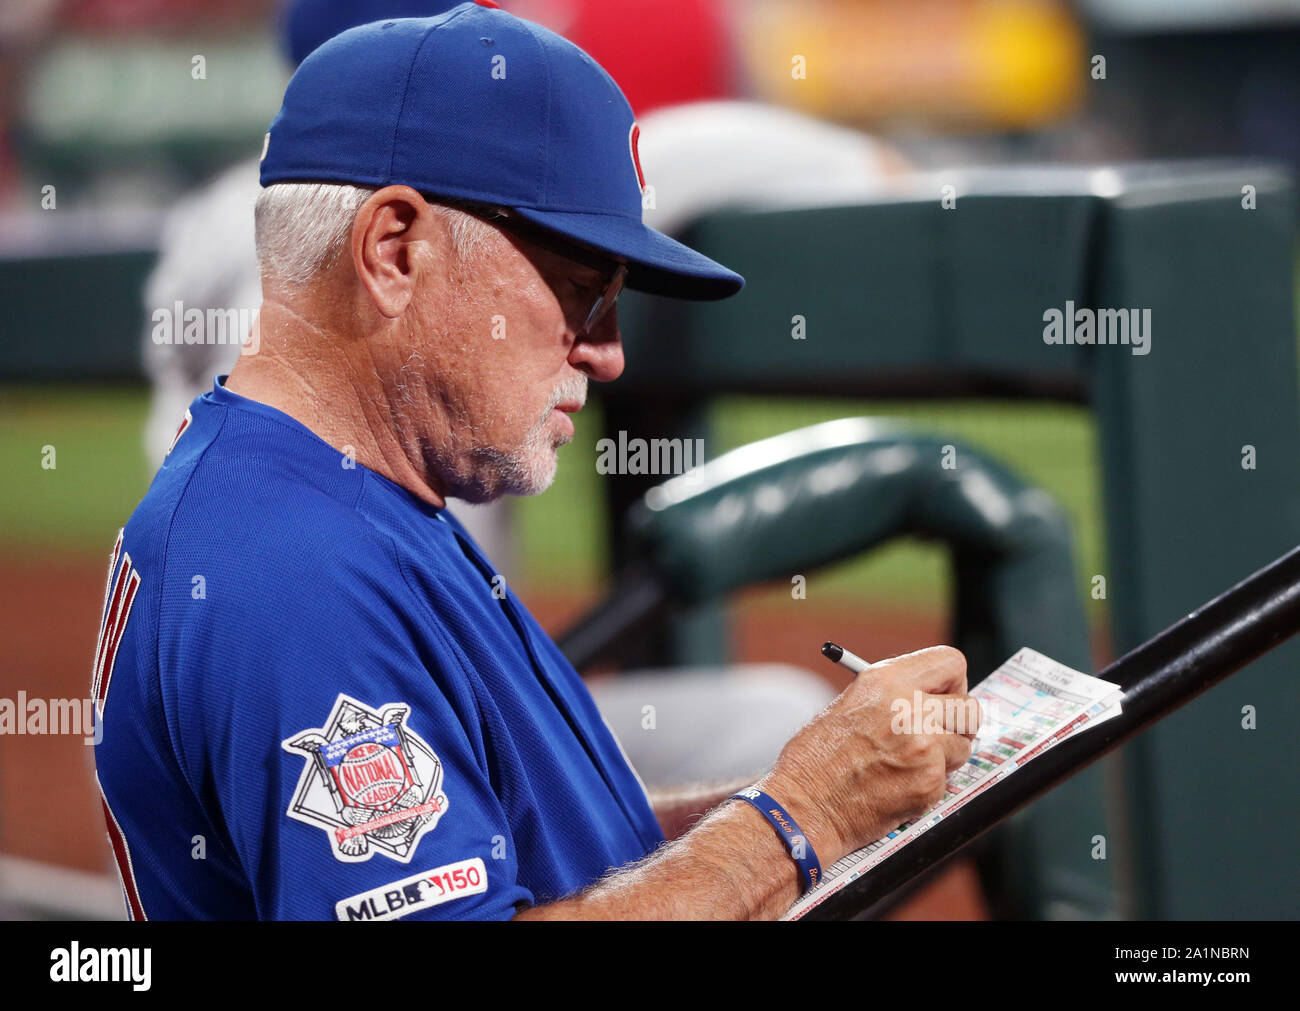 St. Louis, United States. 27th Sep, 2019. Chicago Cubs manager Joe Maddon  checks his lineup card during a game against the St. Louis Cardinals at  Busch Stadium in St. Louis on Friday